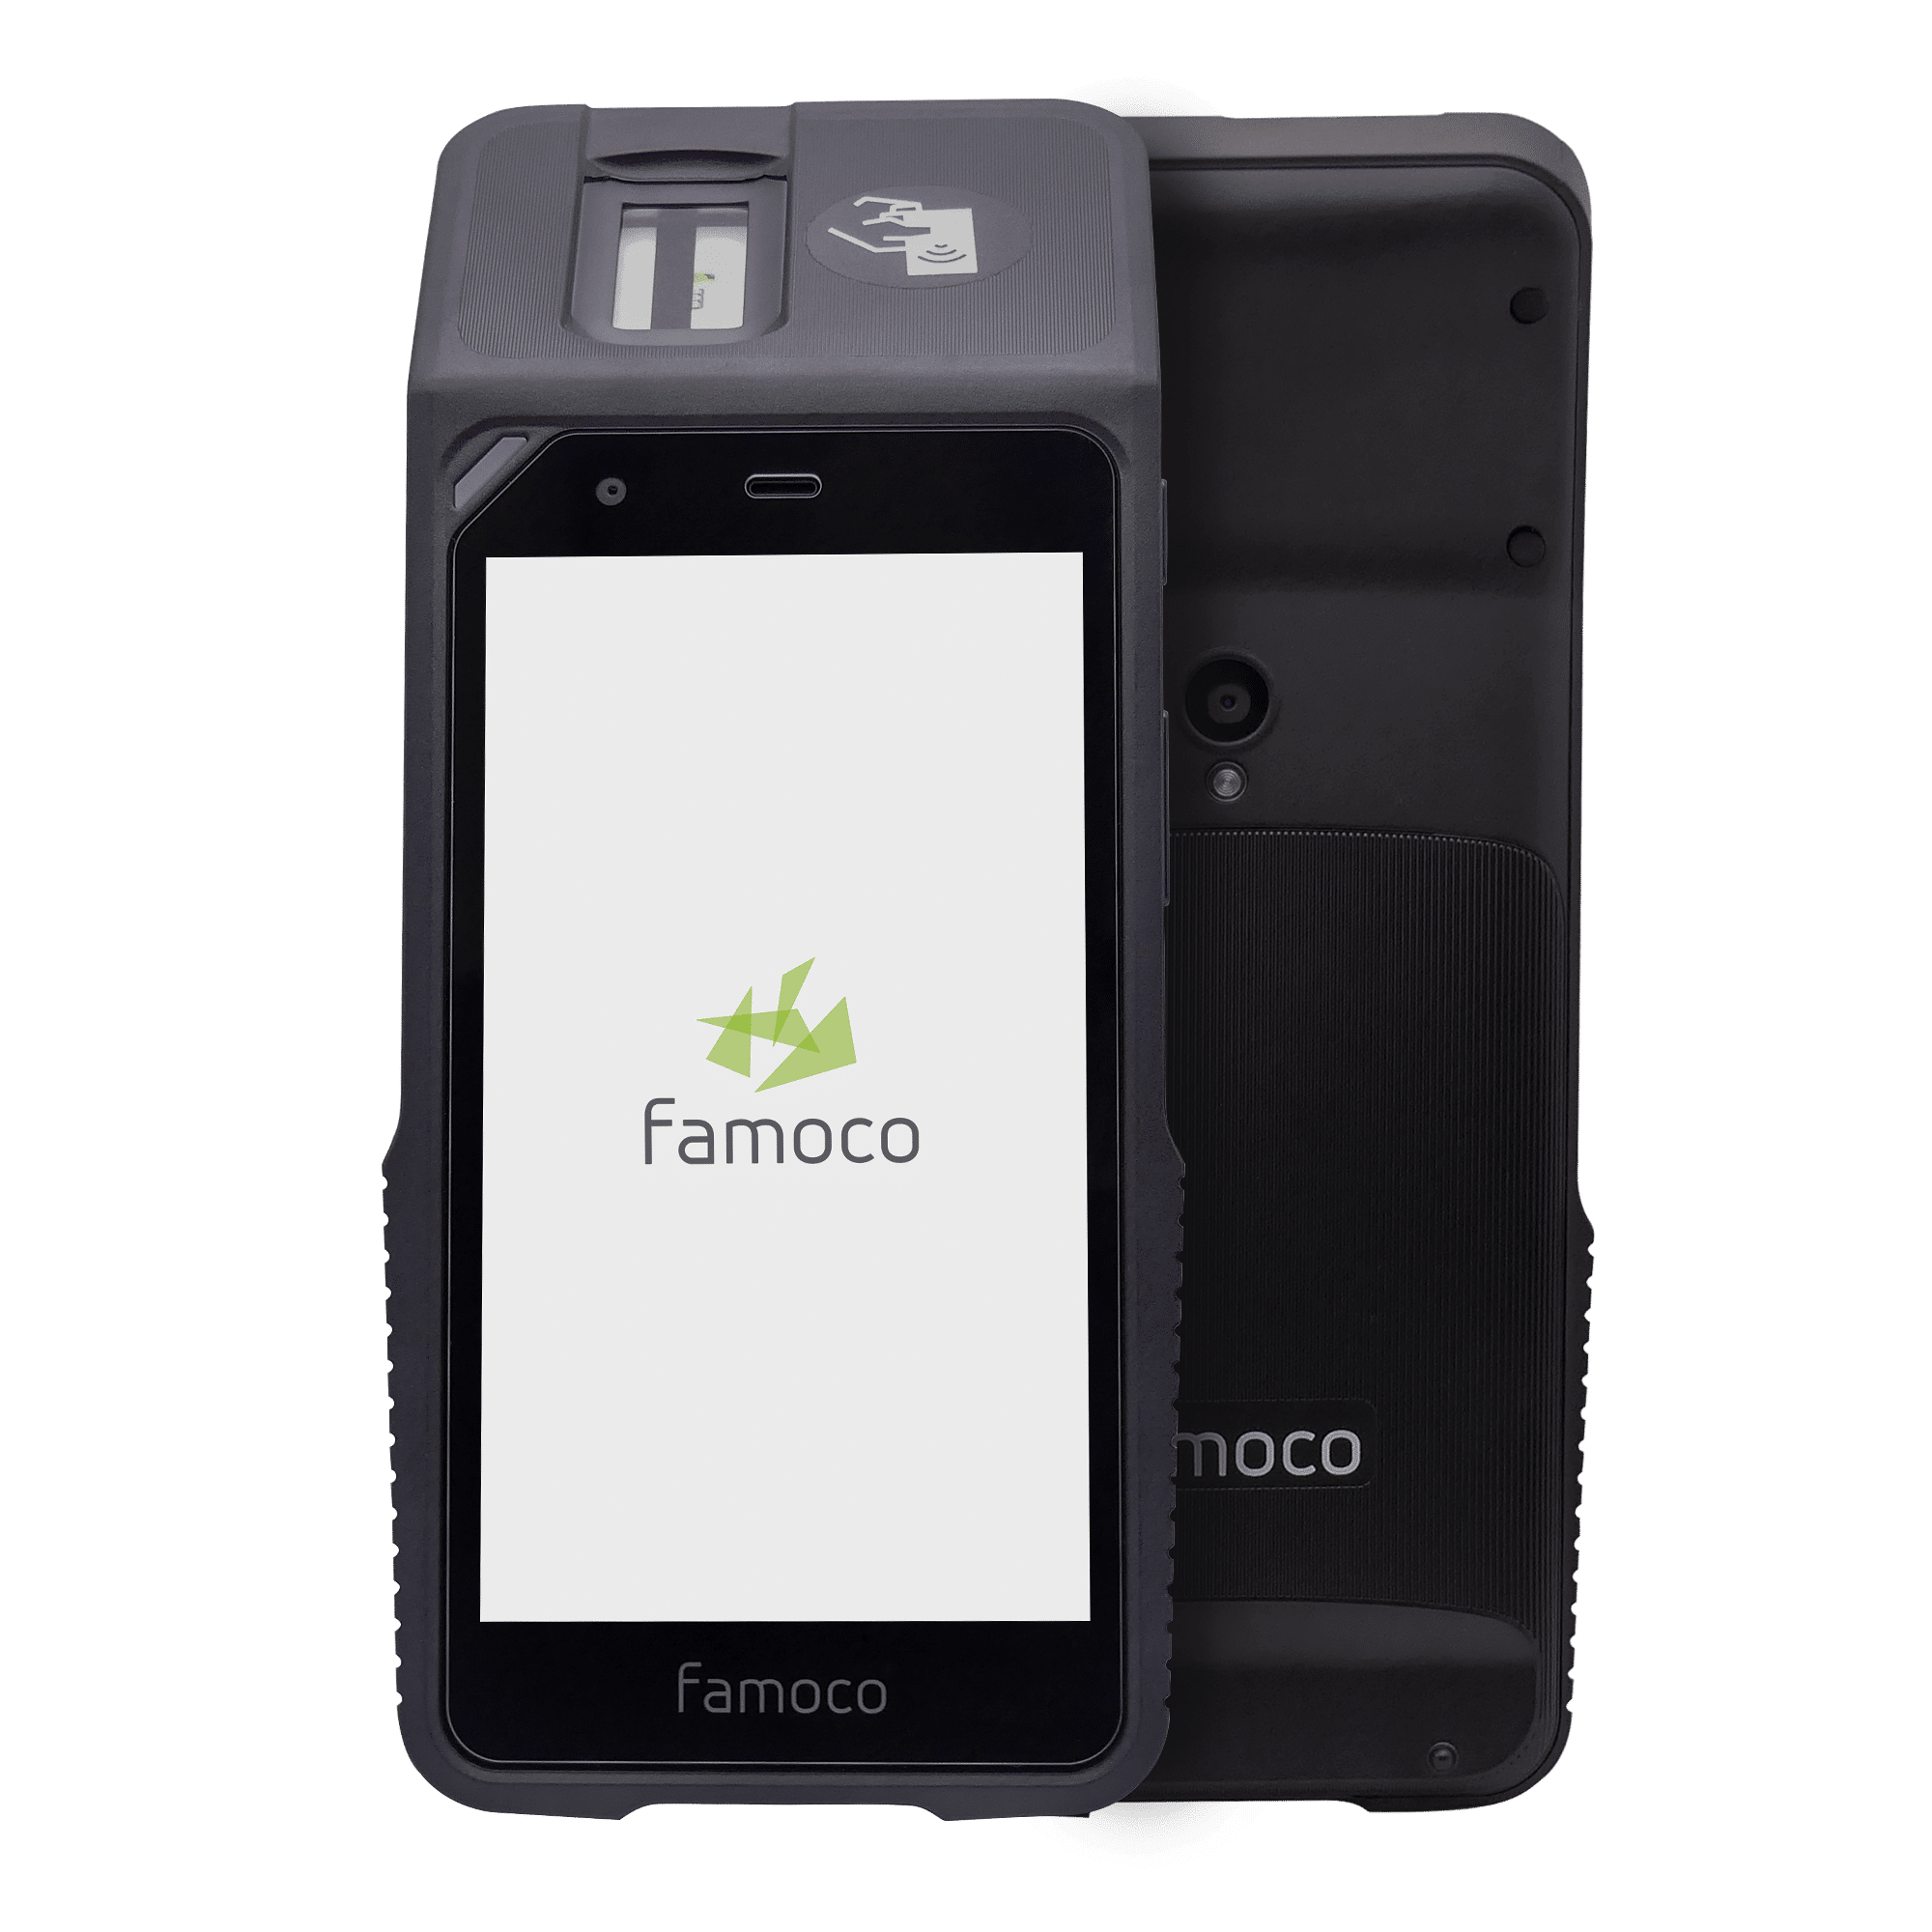 FP201 & FP202 Biometric Android POS made to identify | Products | Famoco